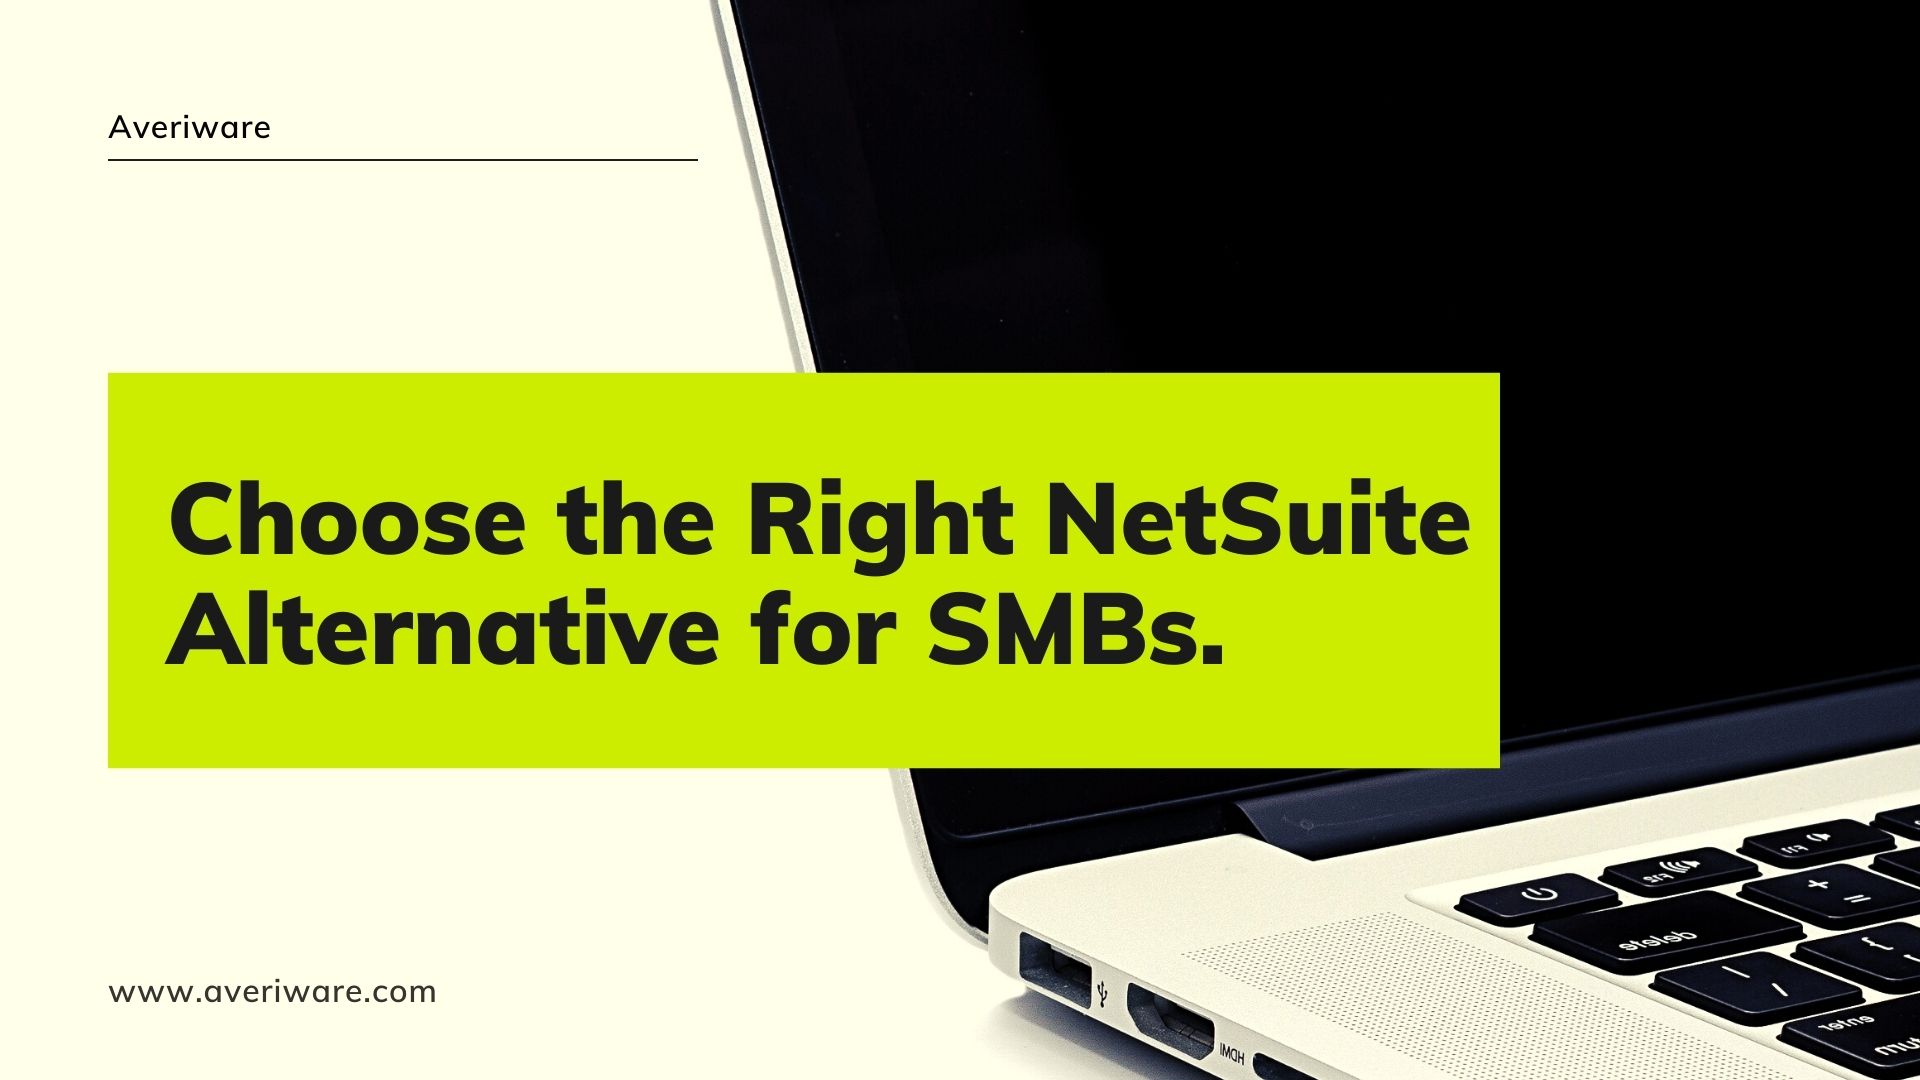 Choose the Right NetSuite Alternative for SMBs